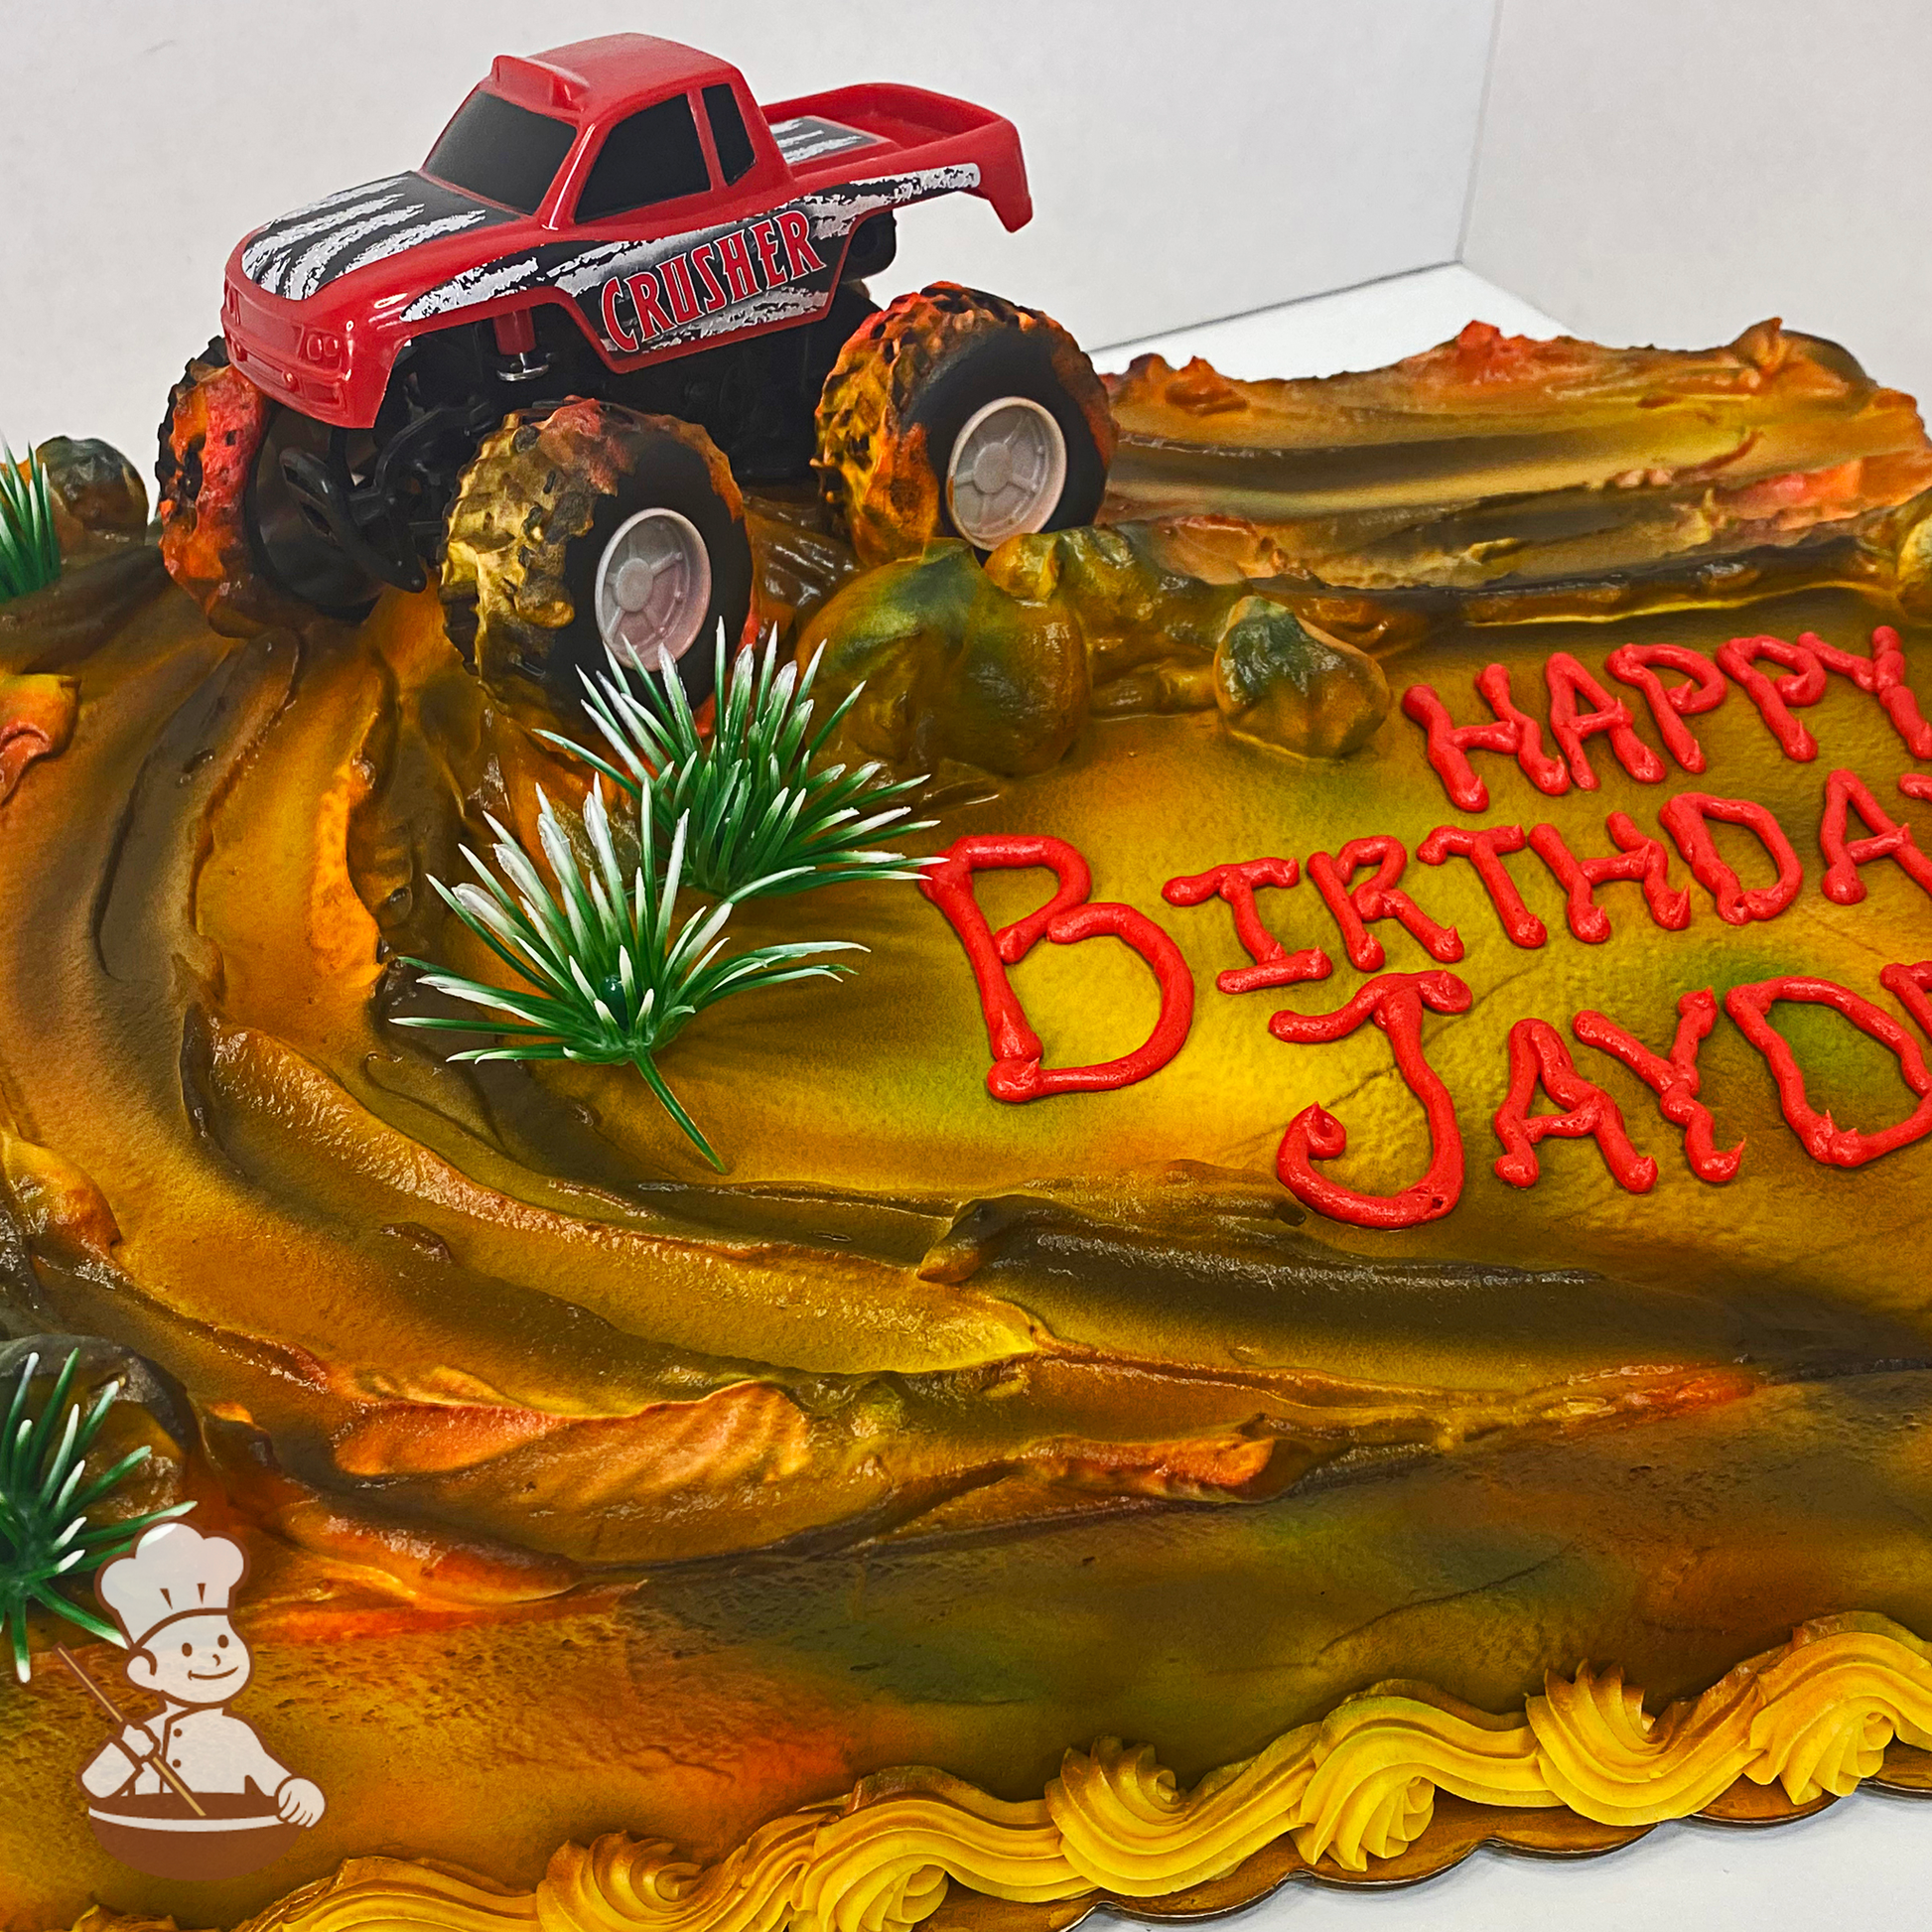 Birthday sheet cake with buttercream dirt mounds and monster truck toy.